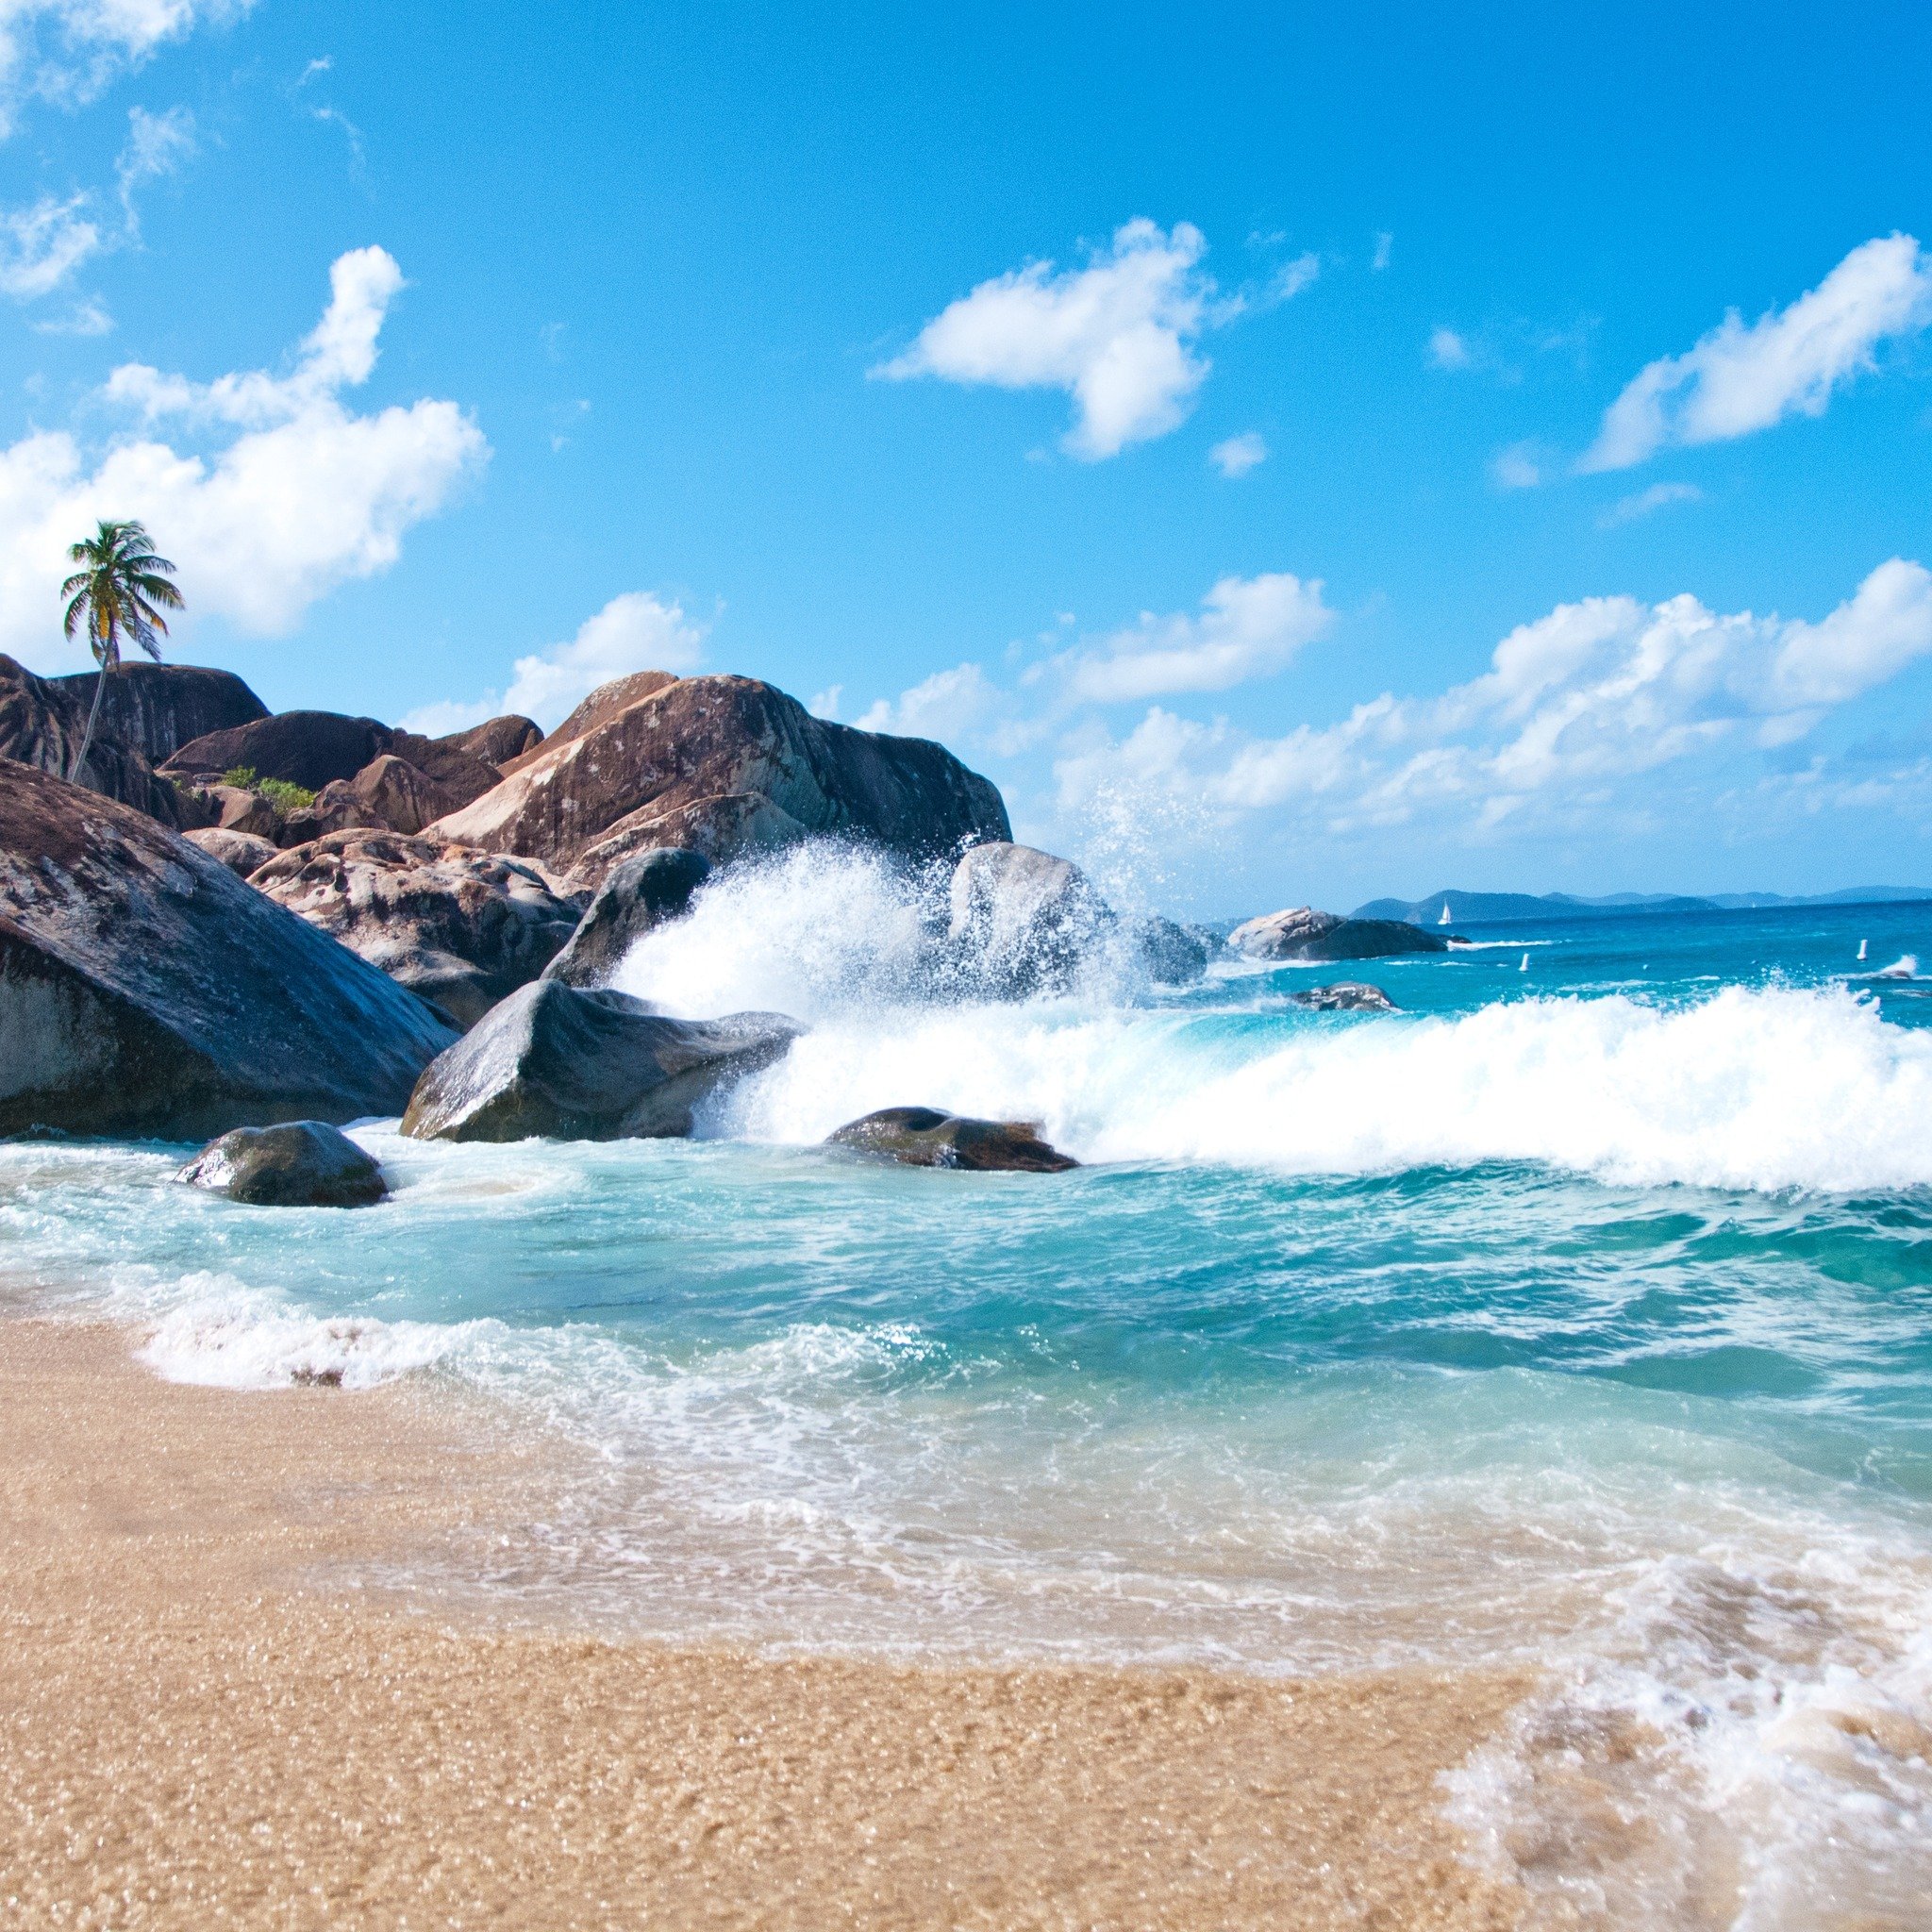 Embark on the ultimate Caribbean adventure in the British Virgin Islands! Explore the surreal beauty of Virgin Gorda's famous Baths, where colossal granite boulders create a labyrinth of enchanting caves and crystal-clear pools to discover. Sail away